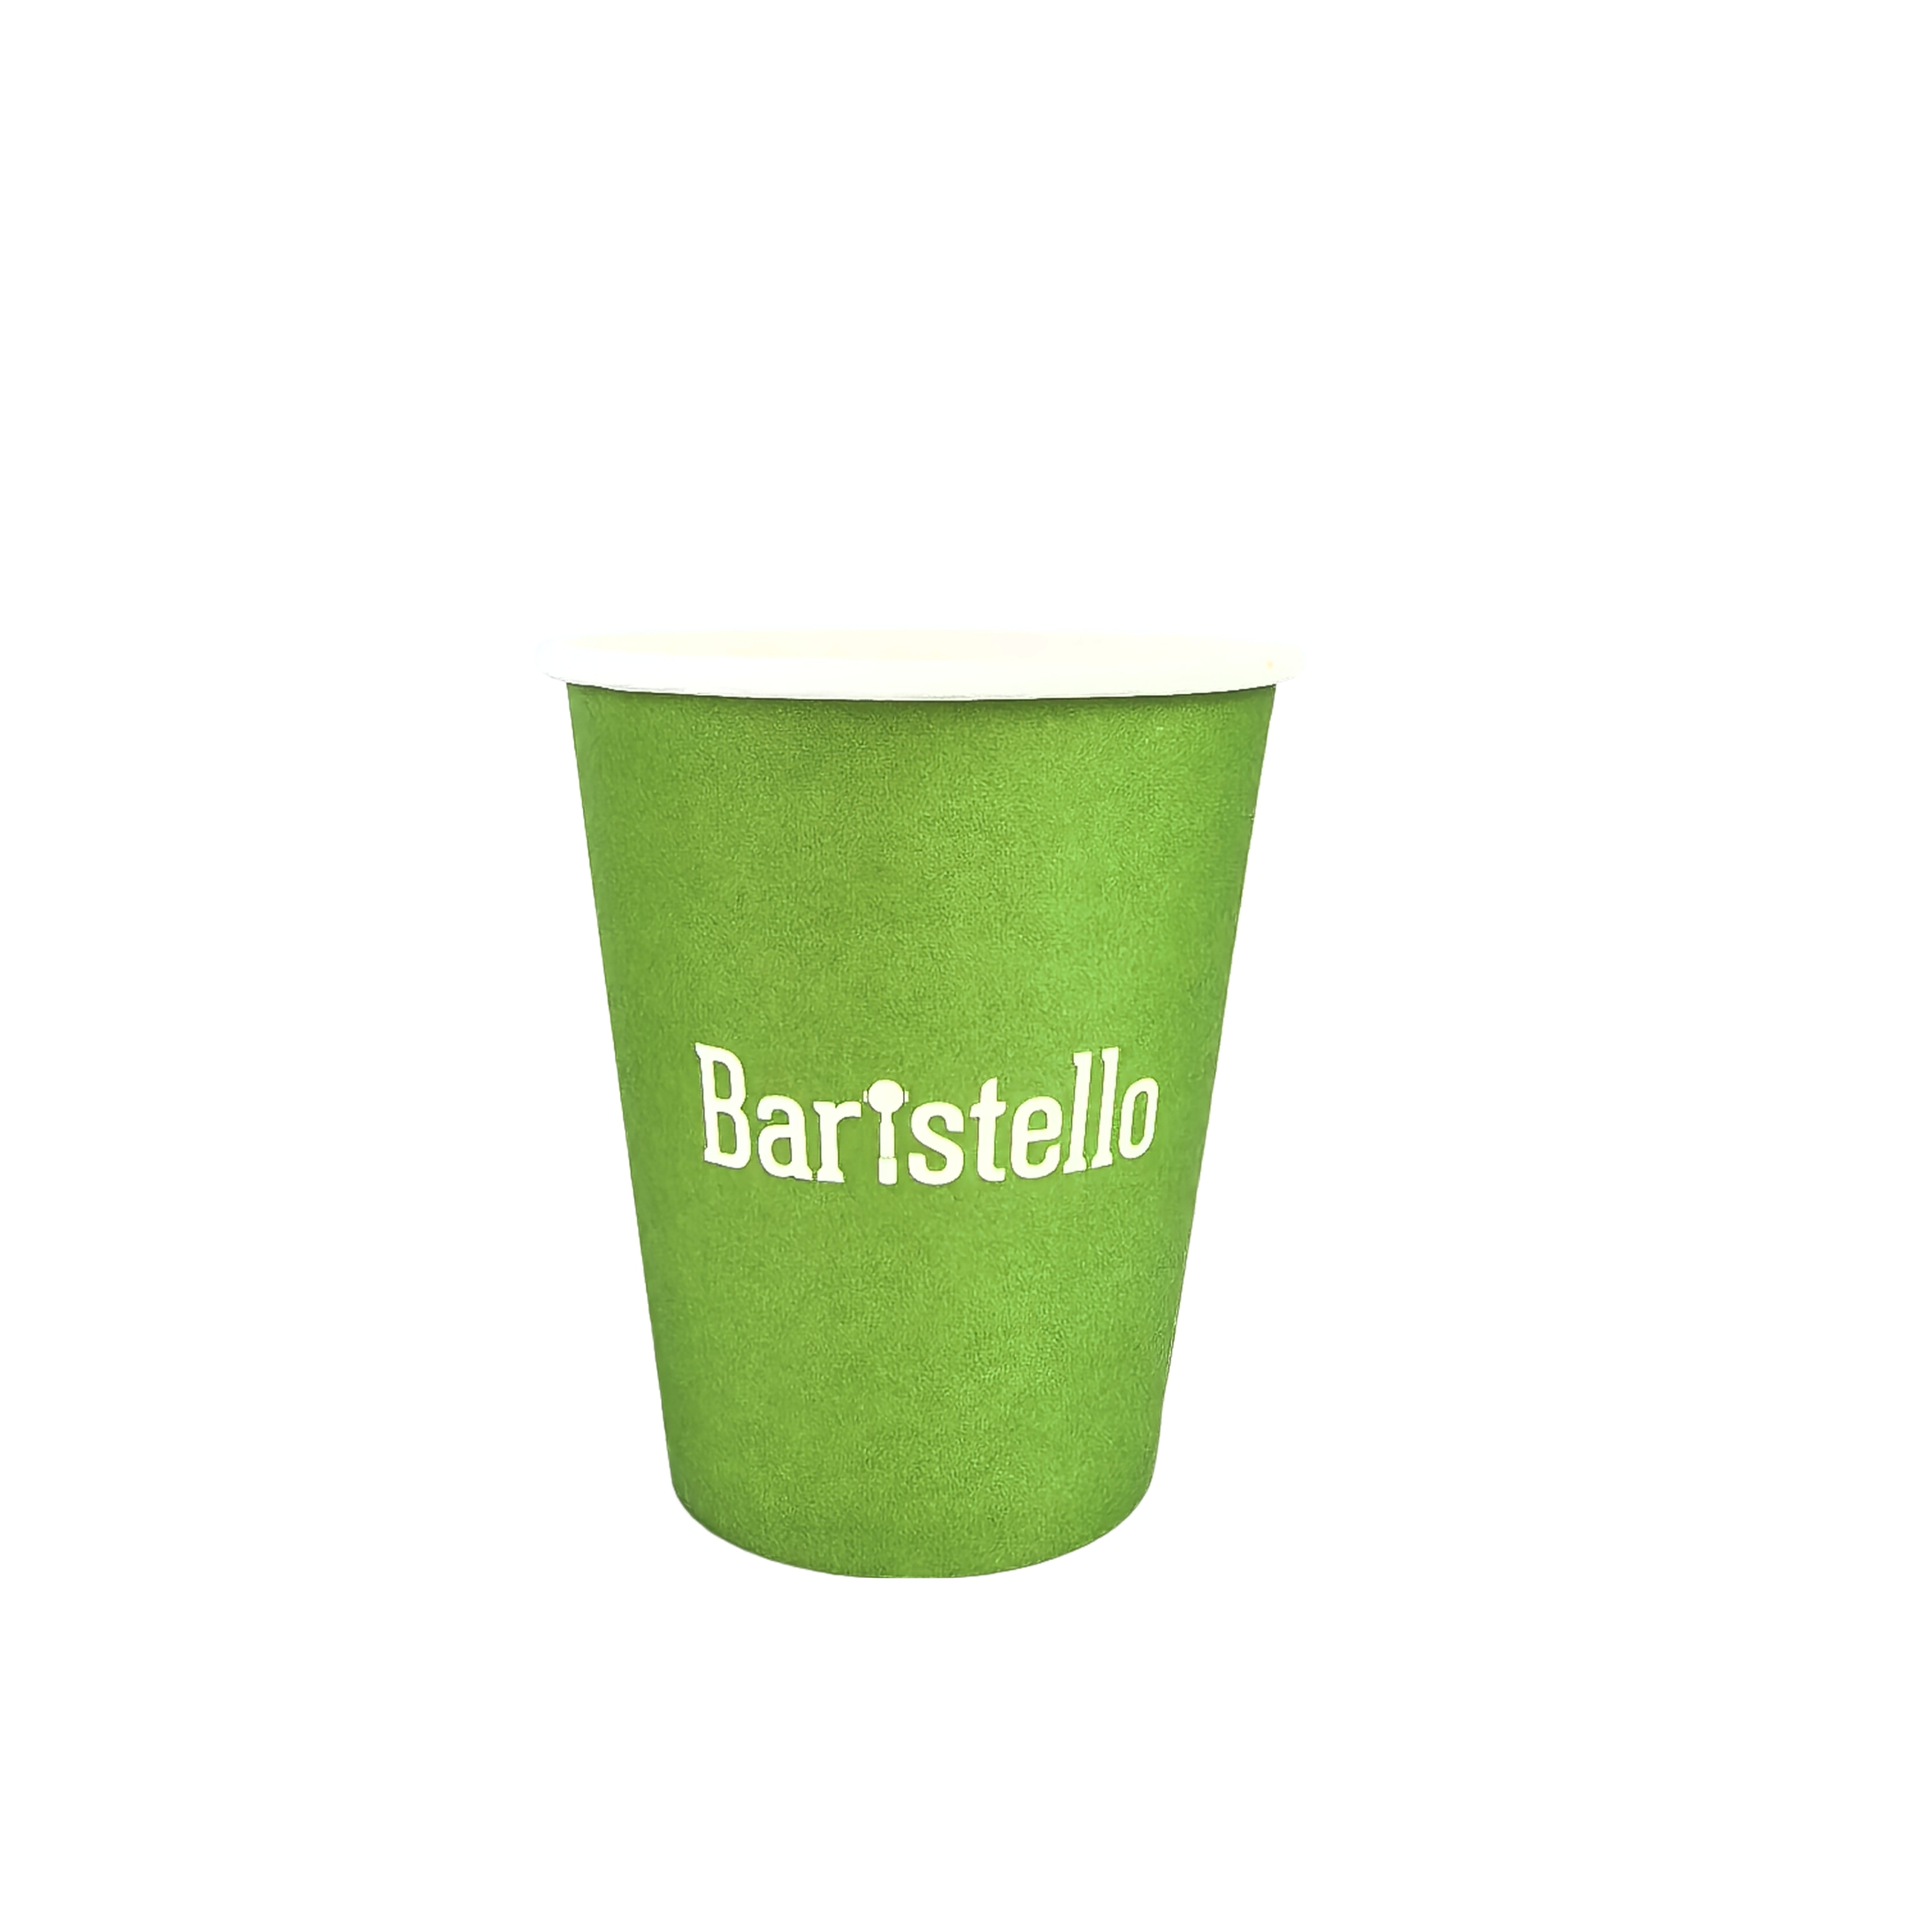 https://www.tuobopackaging.com/compostable-coffee-cups-custom/